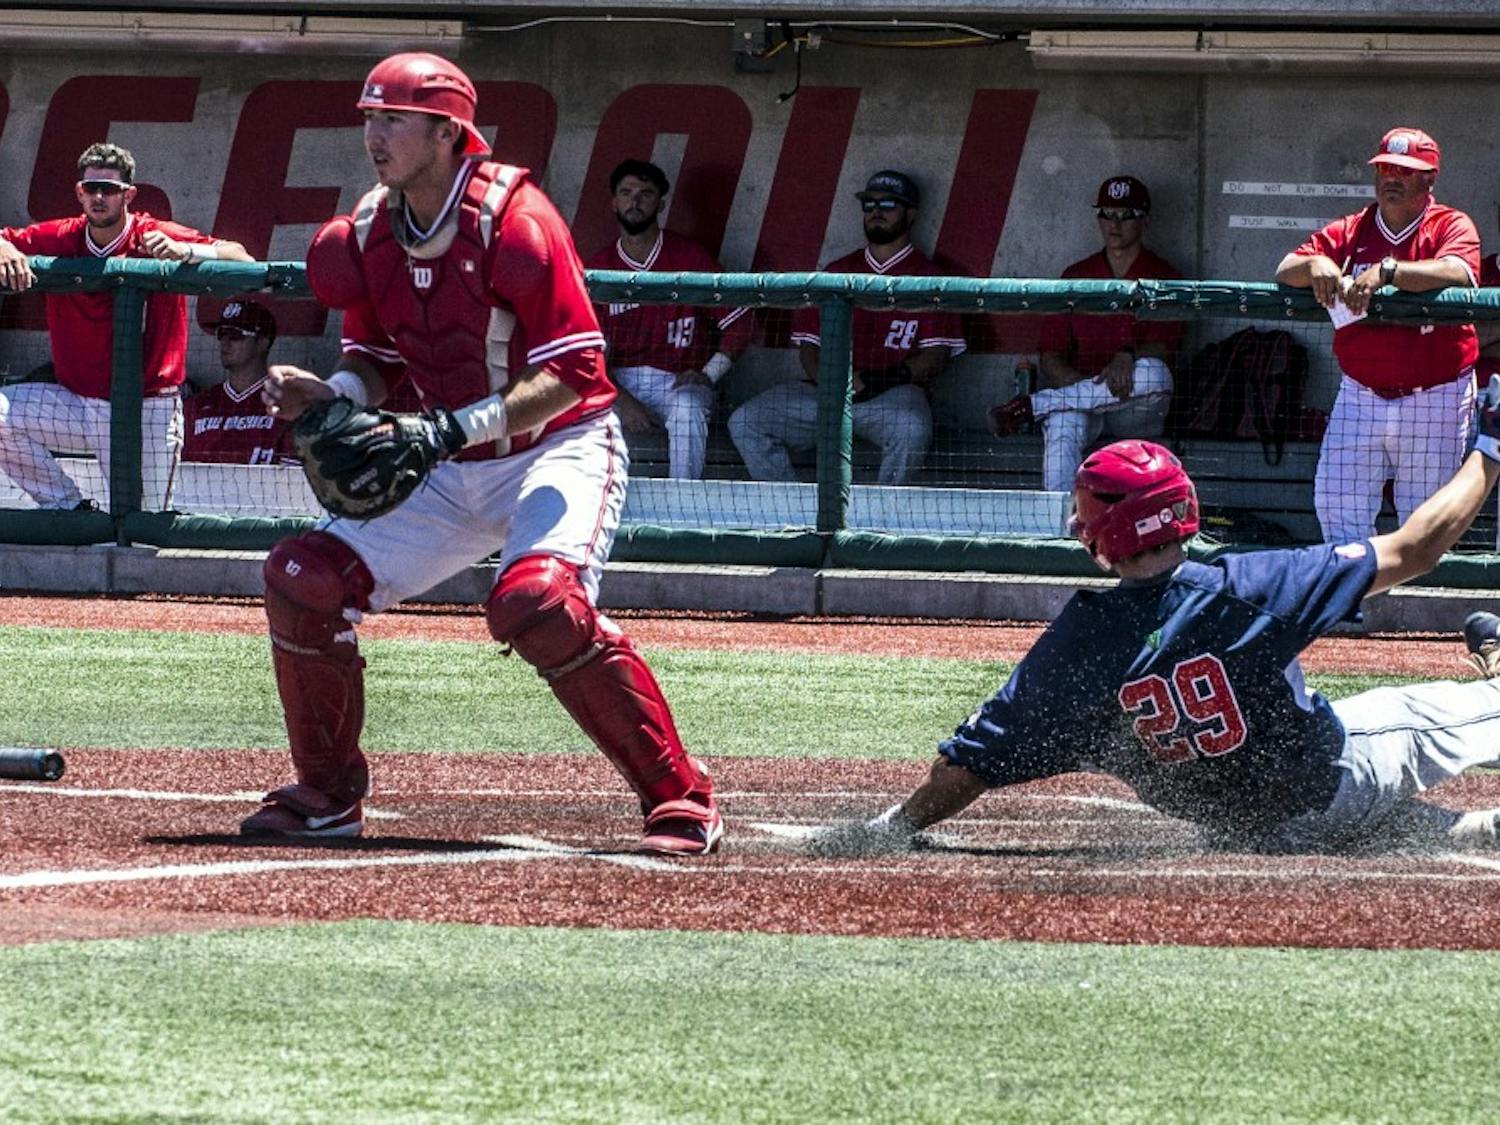 Carter Bins, Fresno State catcher, scores a run during the losers bracket finals at the Mountain West Tournament at the Santa Ana Star Field.